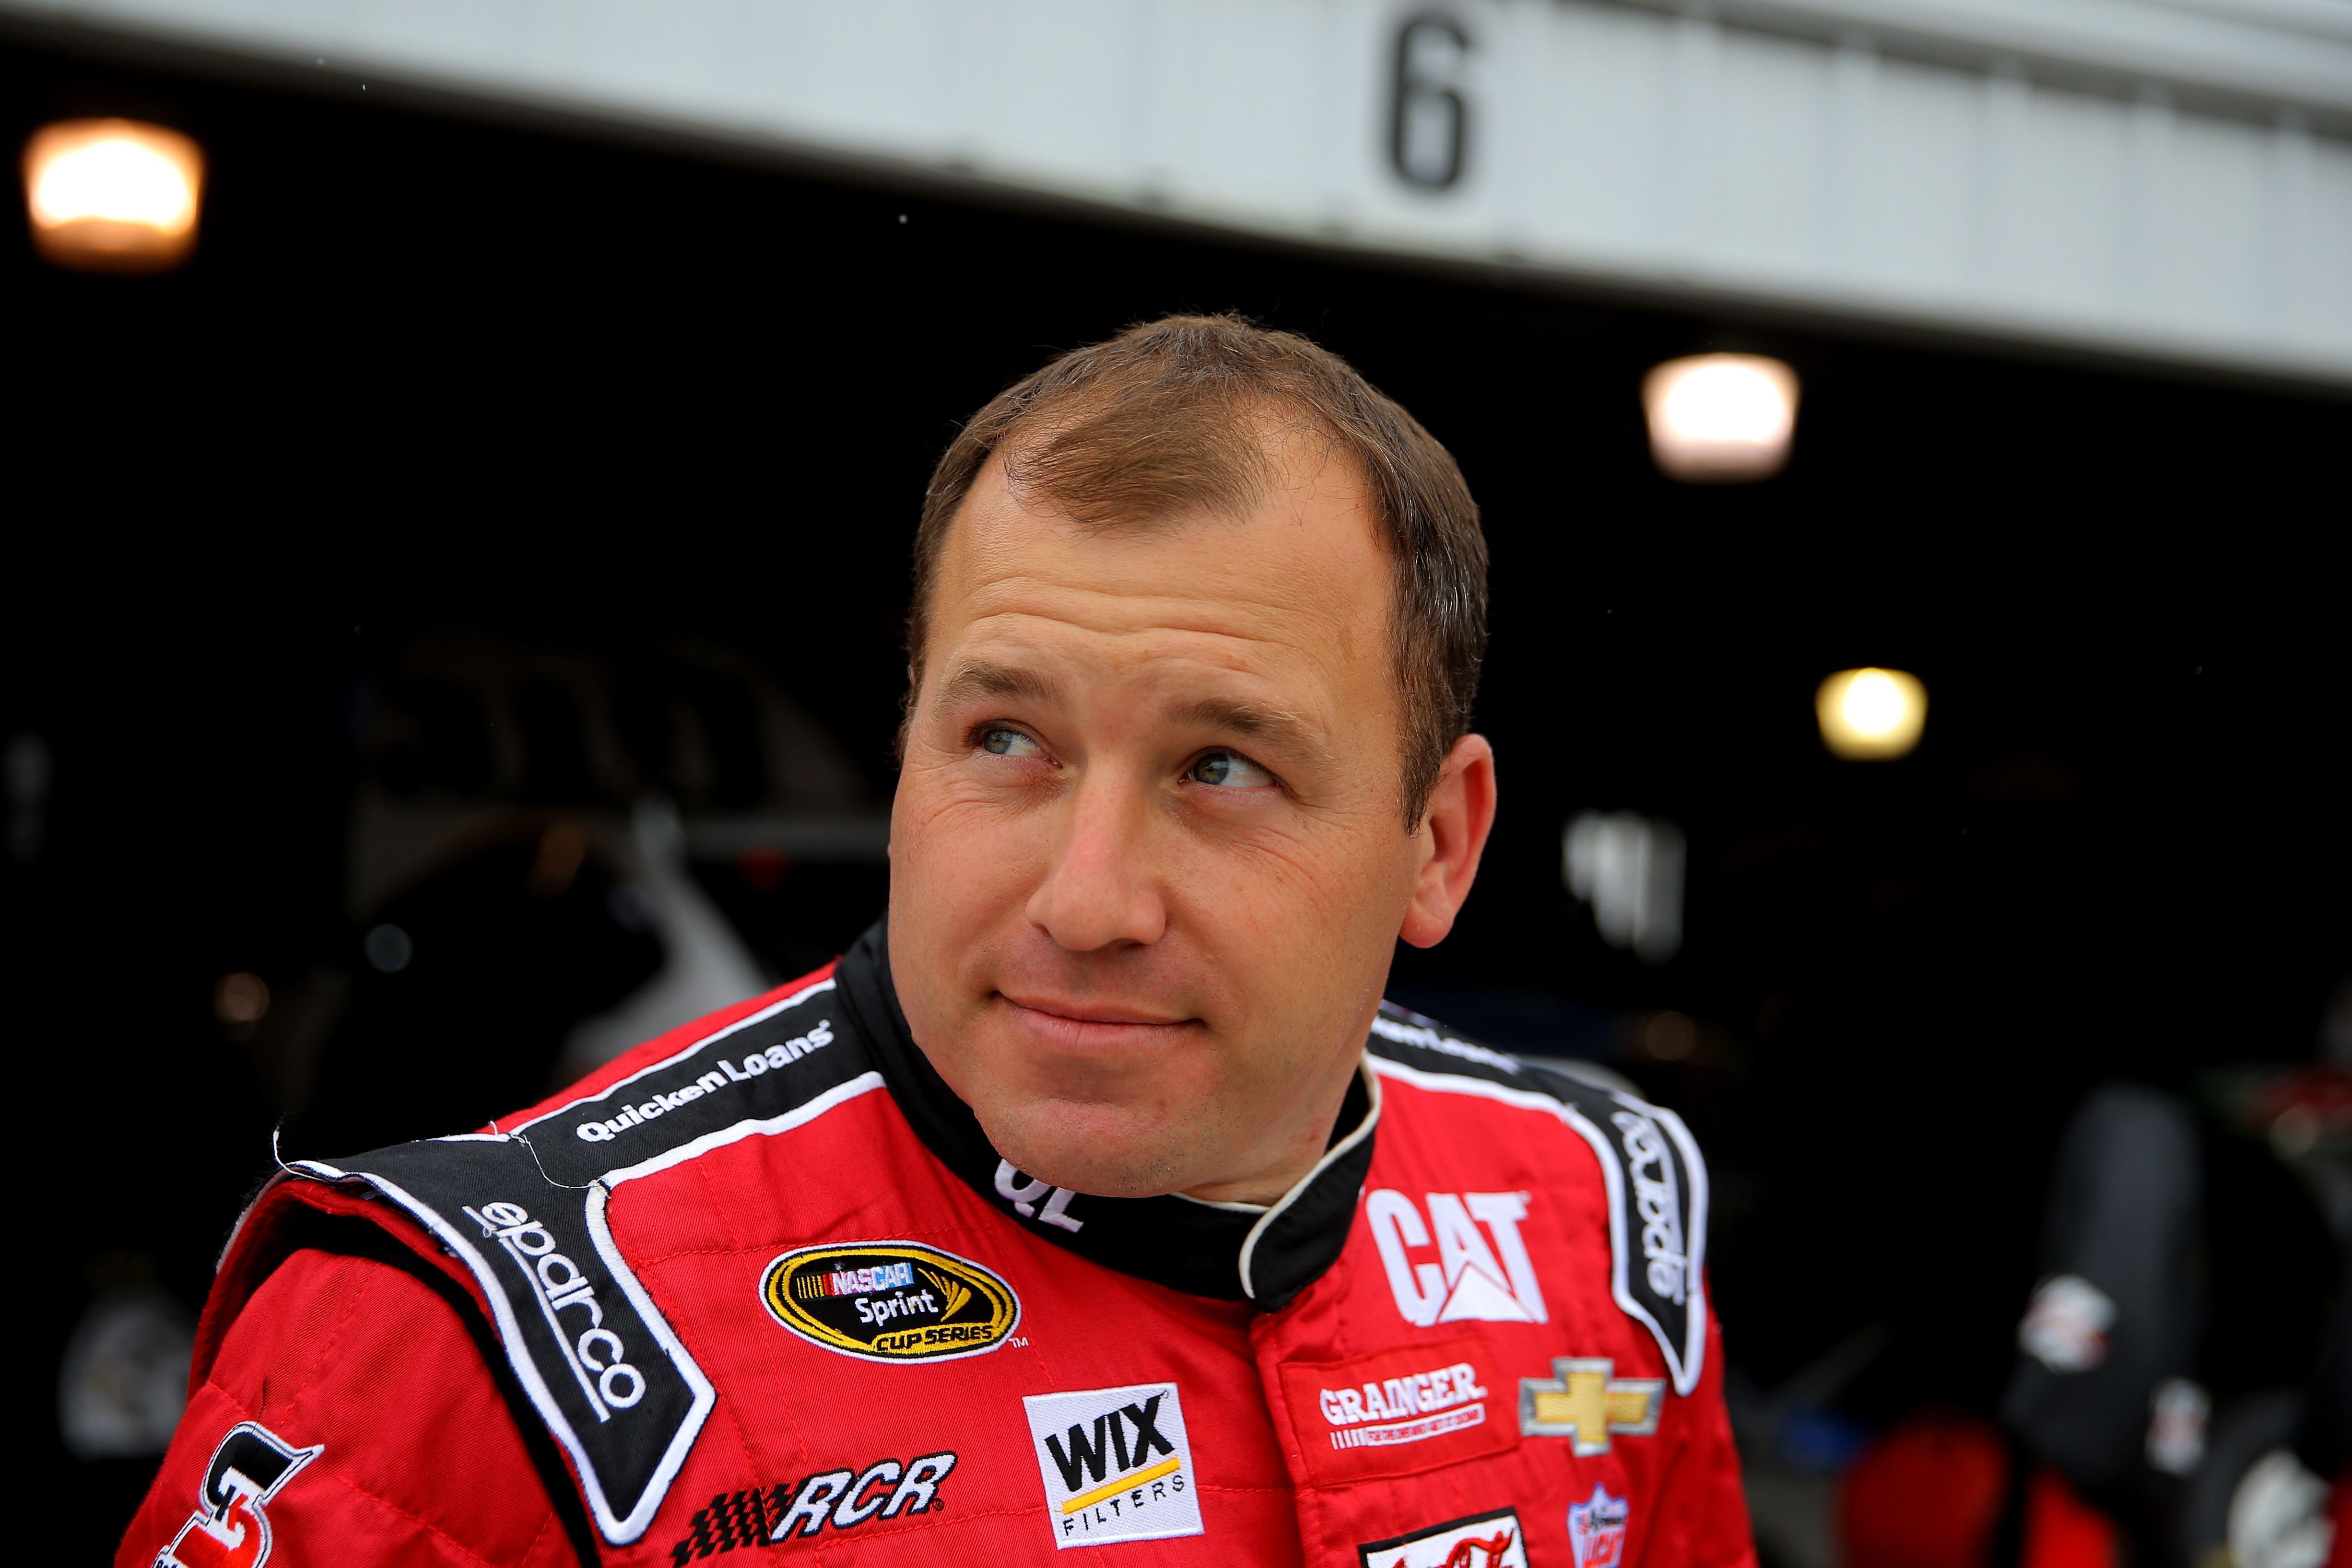 Ryan Newman looks on in the garage area during practice for the NASCAR Sprint Cup Series STP 500 at Martinsville Speedway on March 27, 2015 in Martinsville, Virginia. | Source: Getty Images